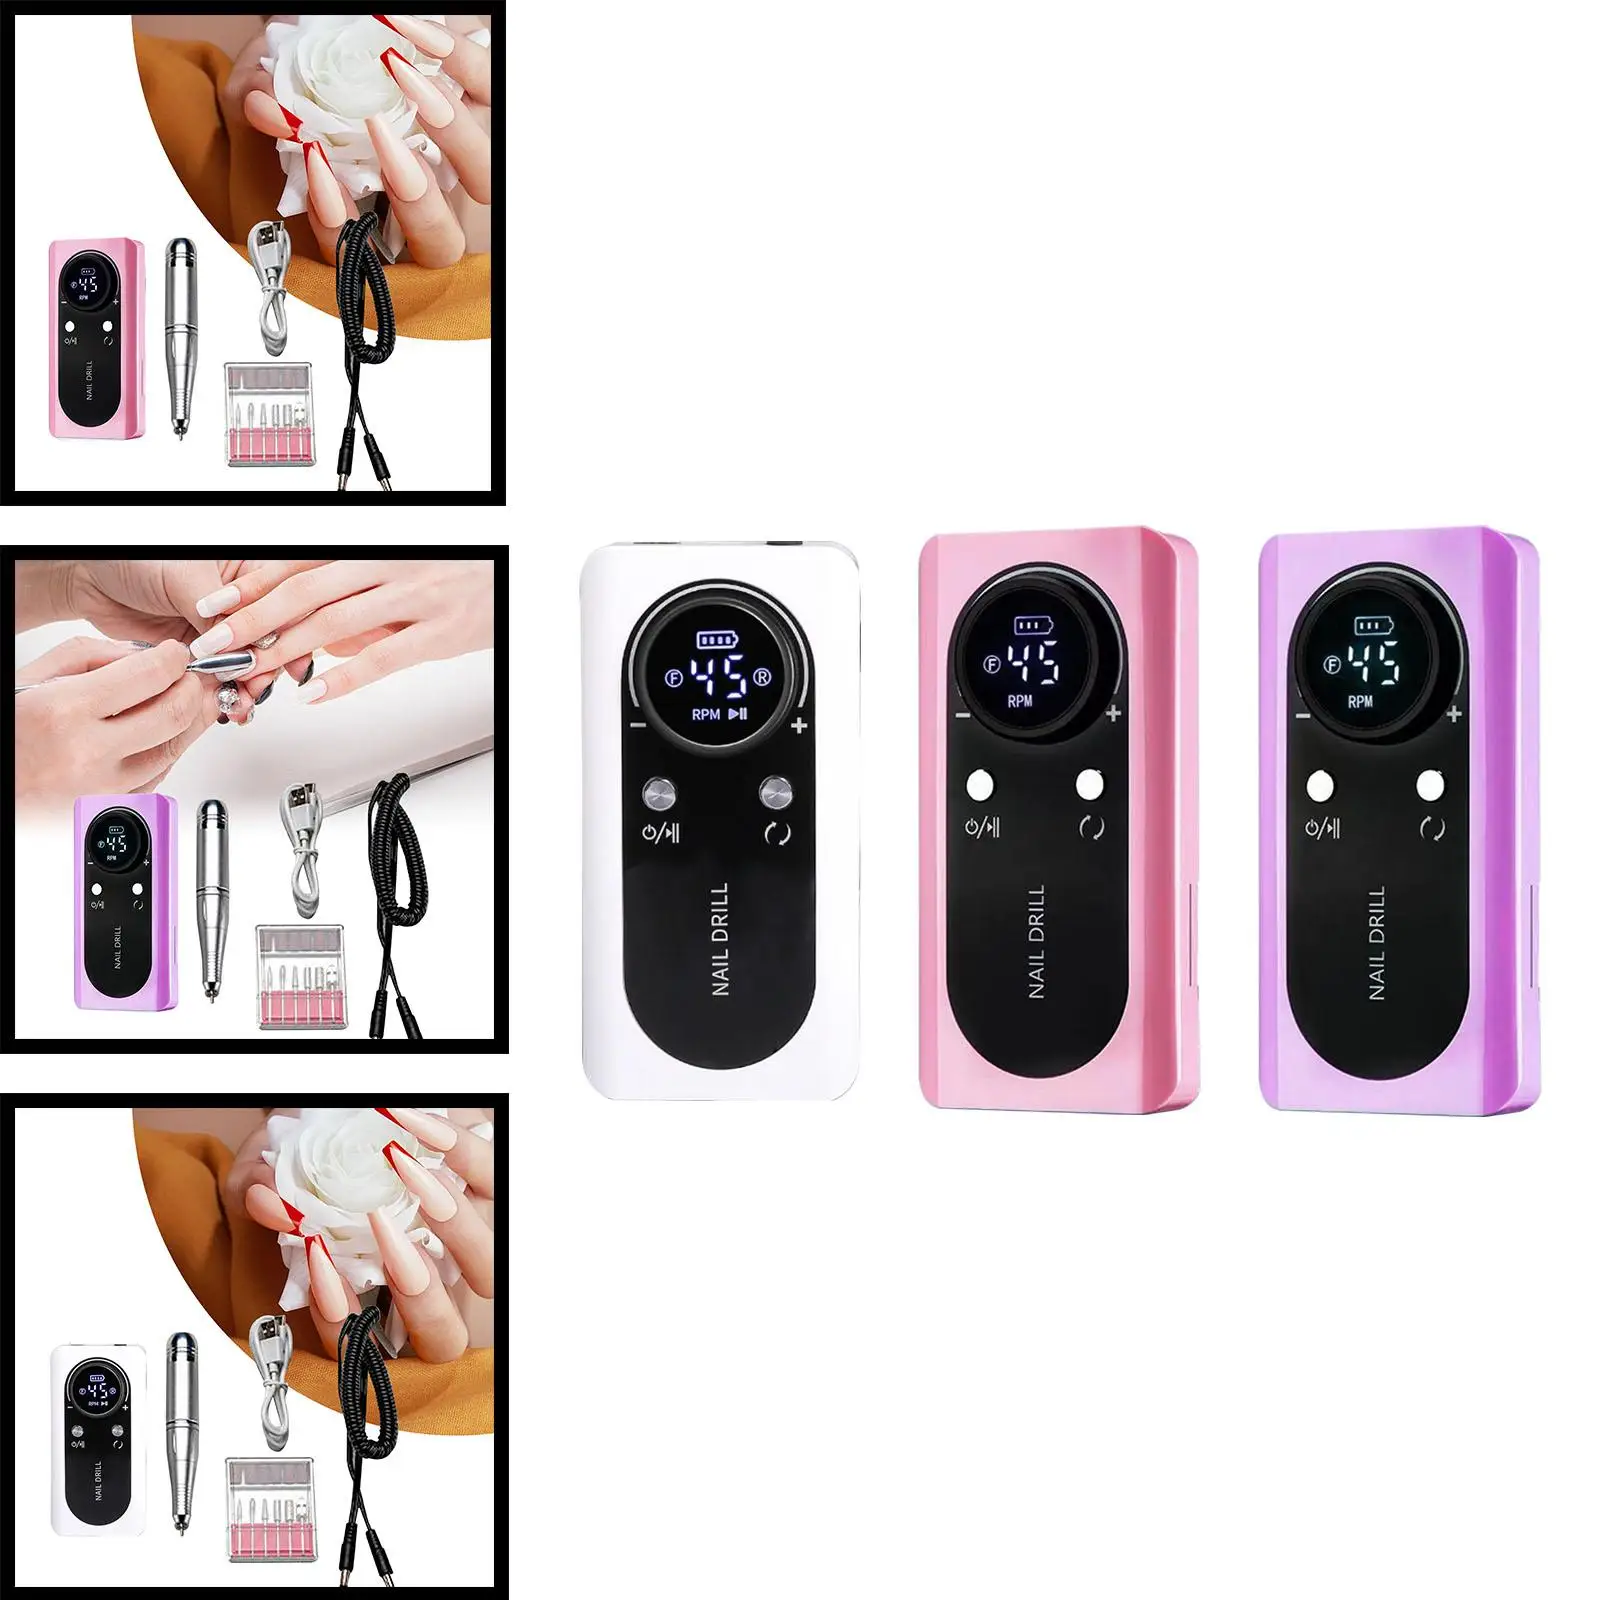 Electric Nail Drill Machine 45000RPM Rechargeable Manicure Pedicure Kits for Polishing Cutting Removing Trimming Acrylic Nail